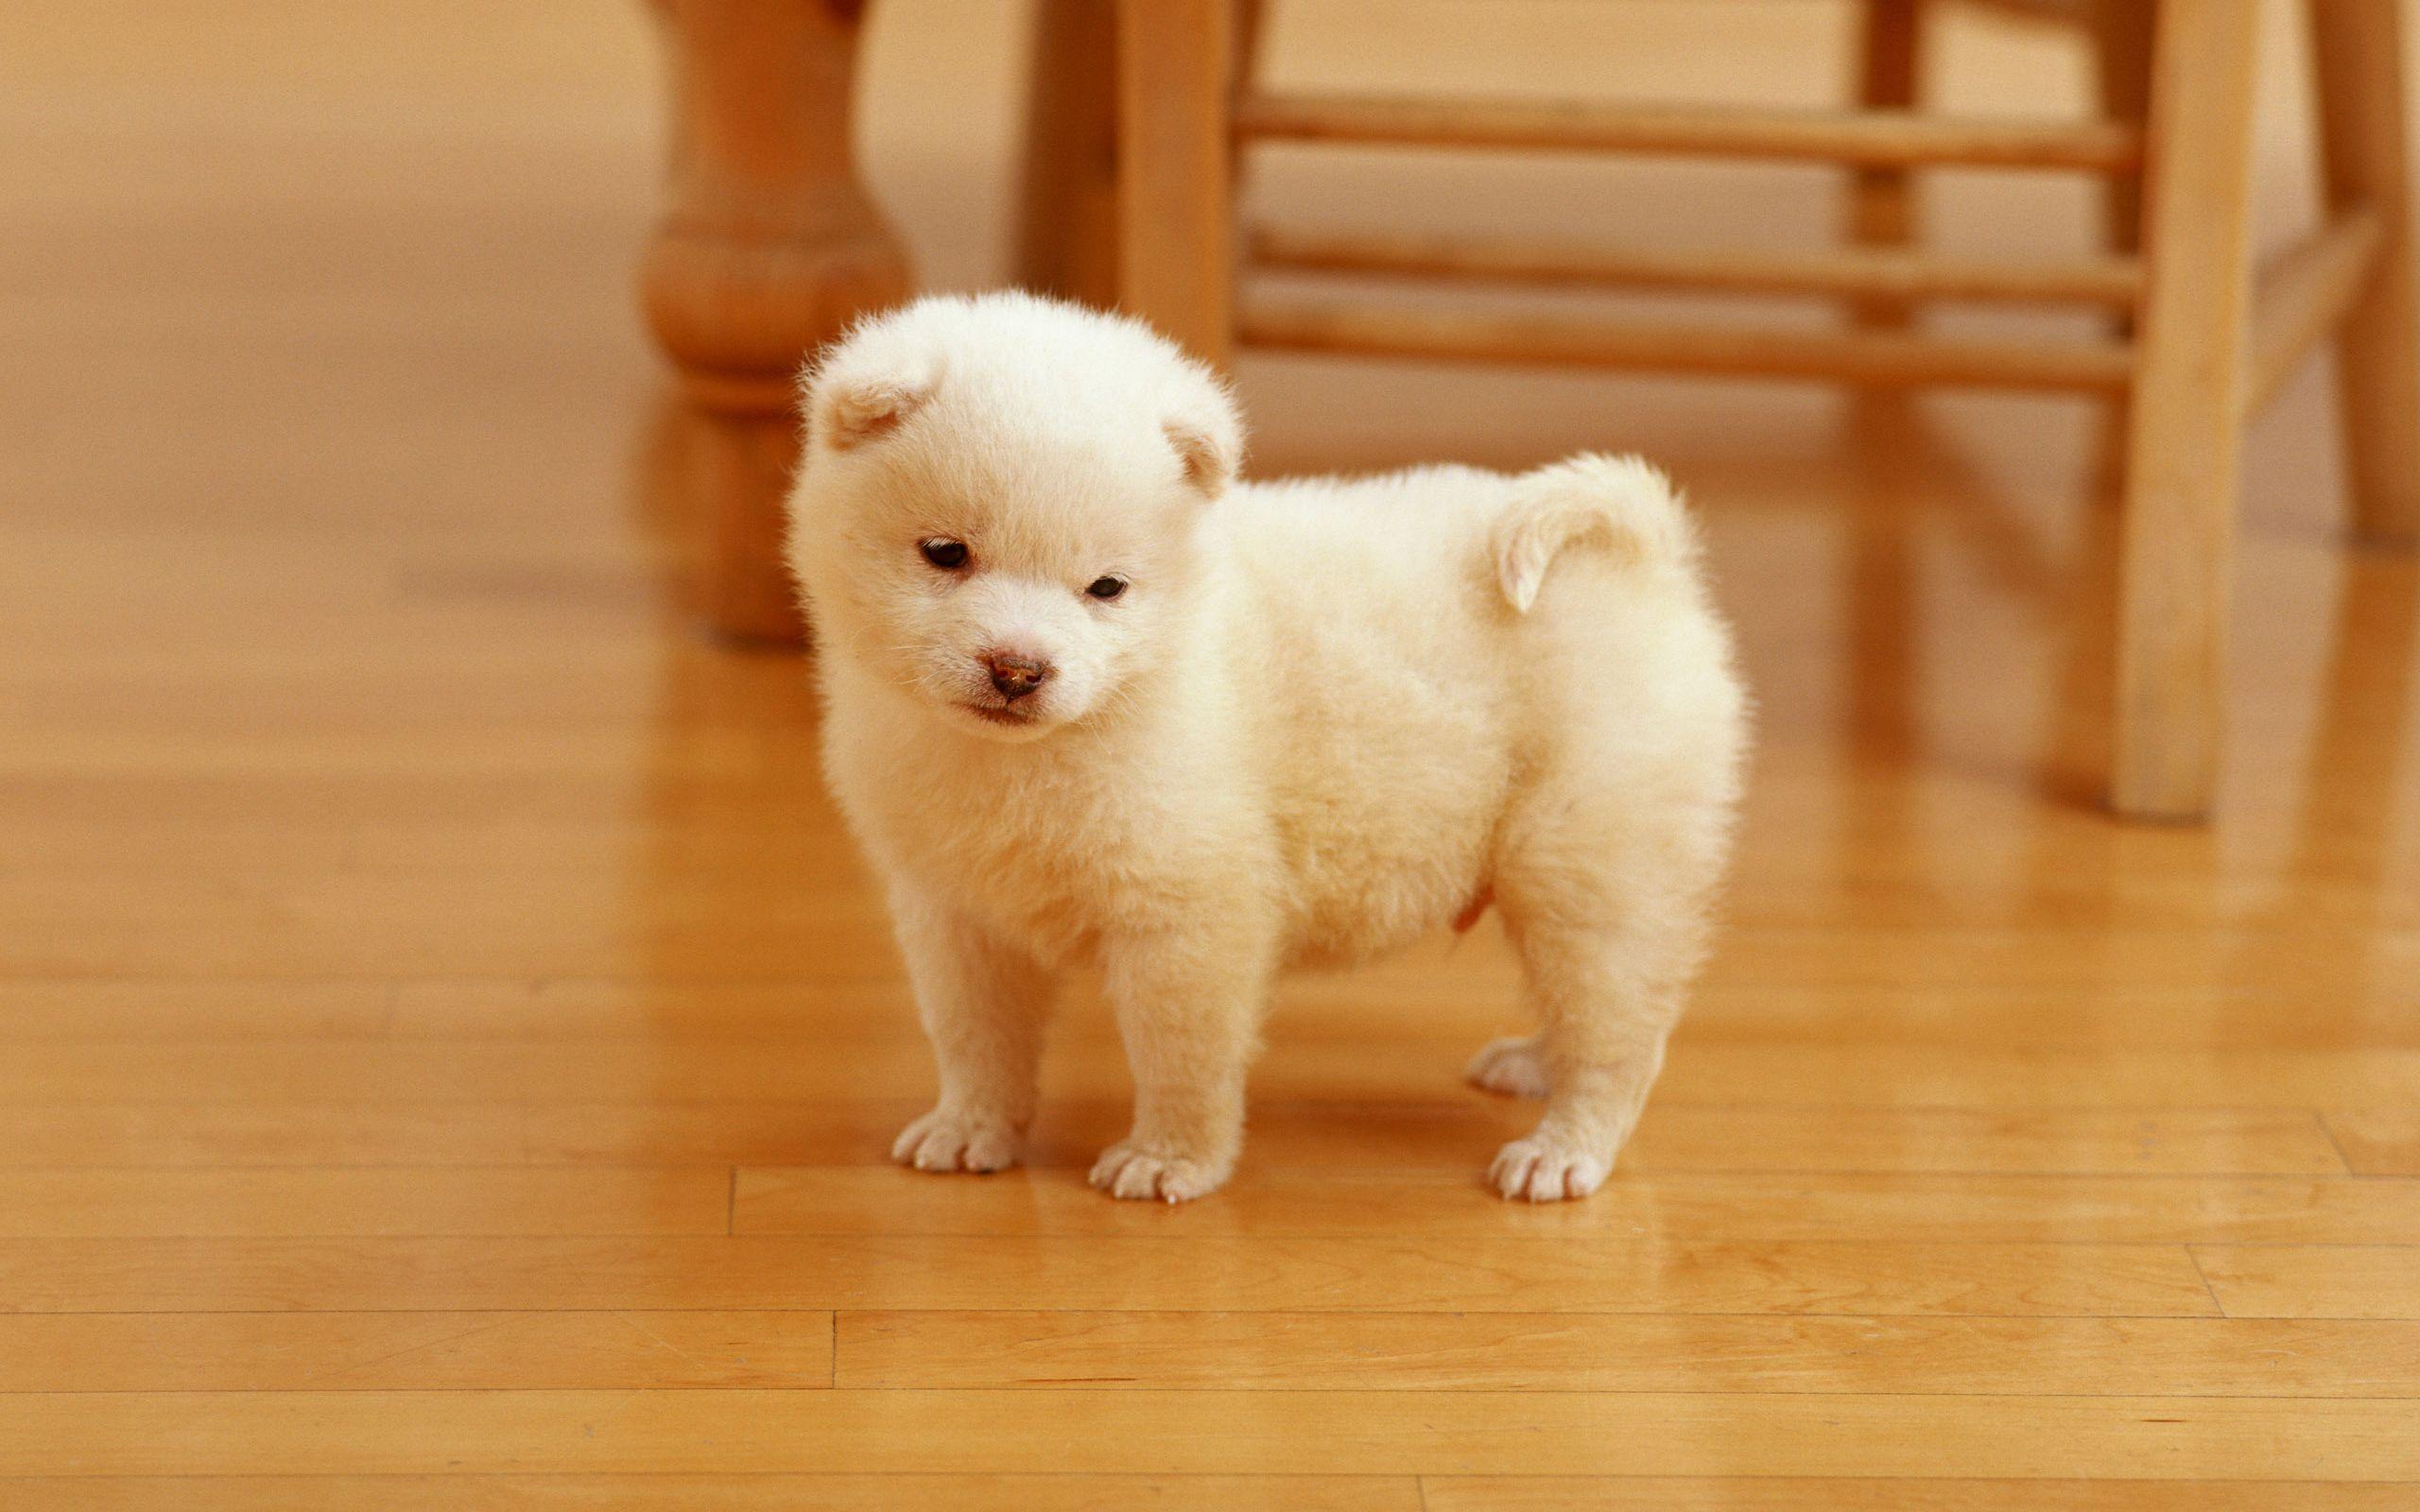 Cute Puppy 4K Wallpapers - Top Free Cute Puppy 4K Backgrounds ...